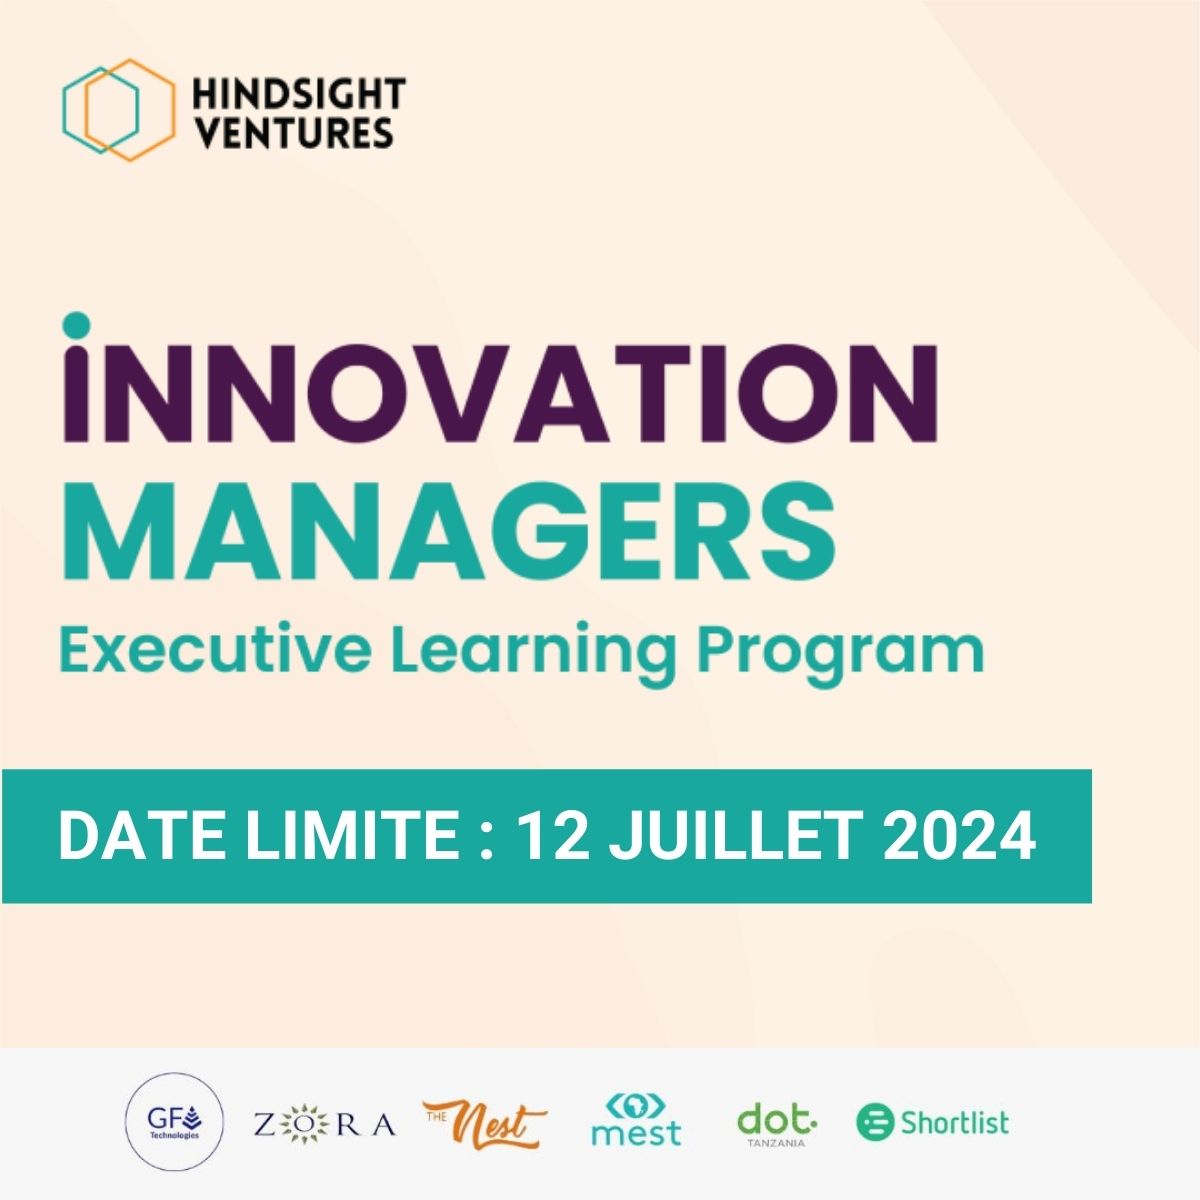 Appel à candidature : Innovation Managers Executive Learning Program | Start-up.ma